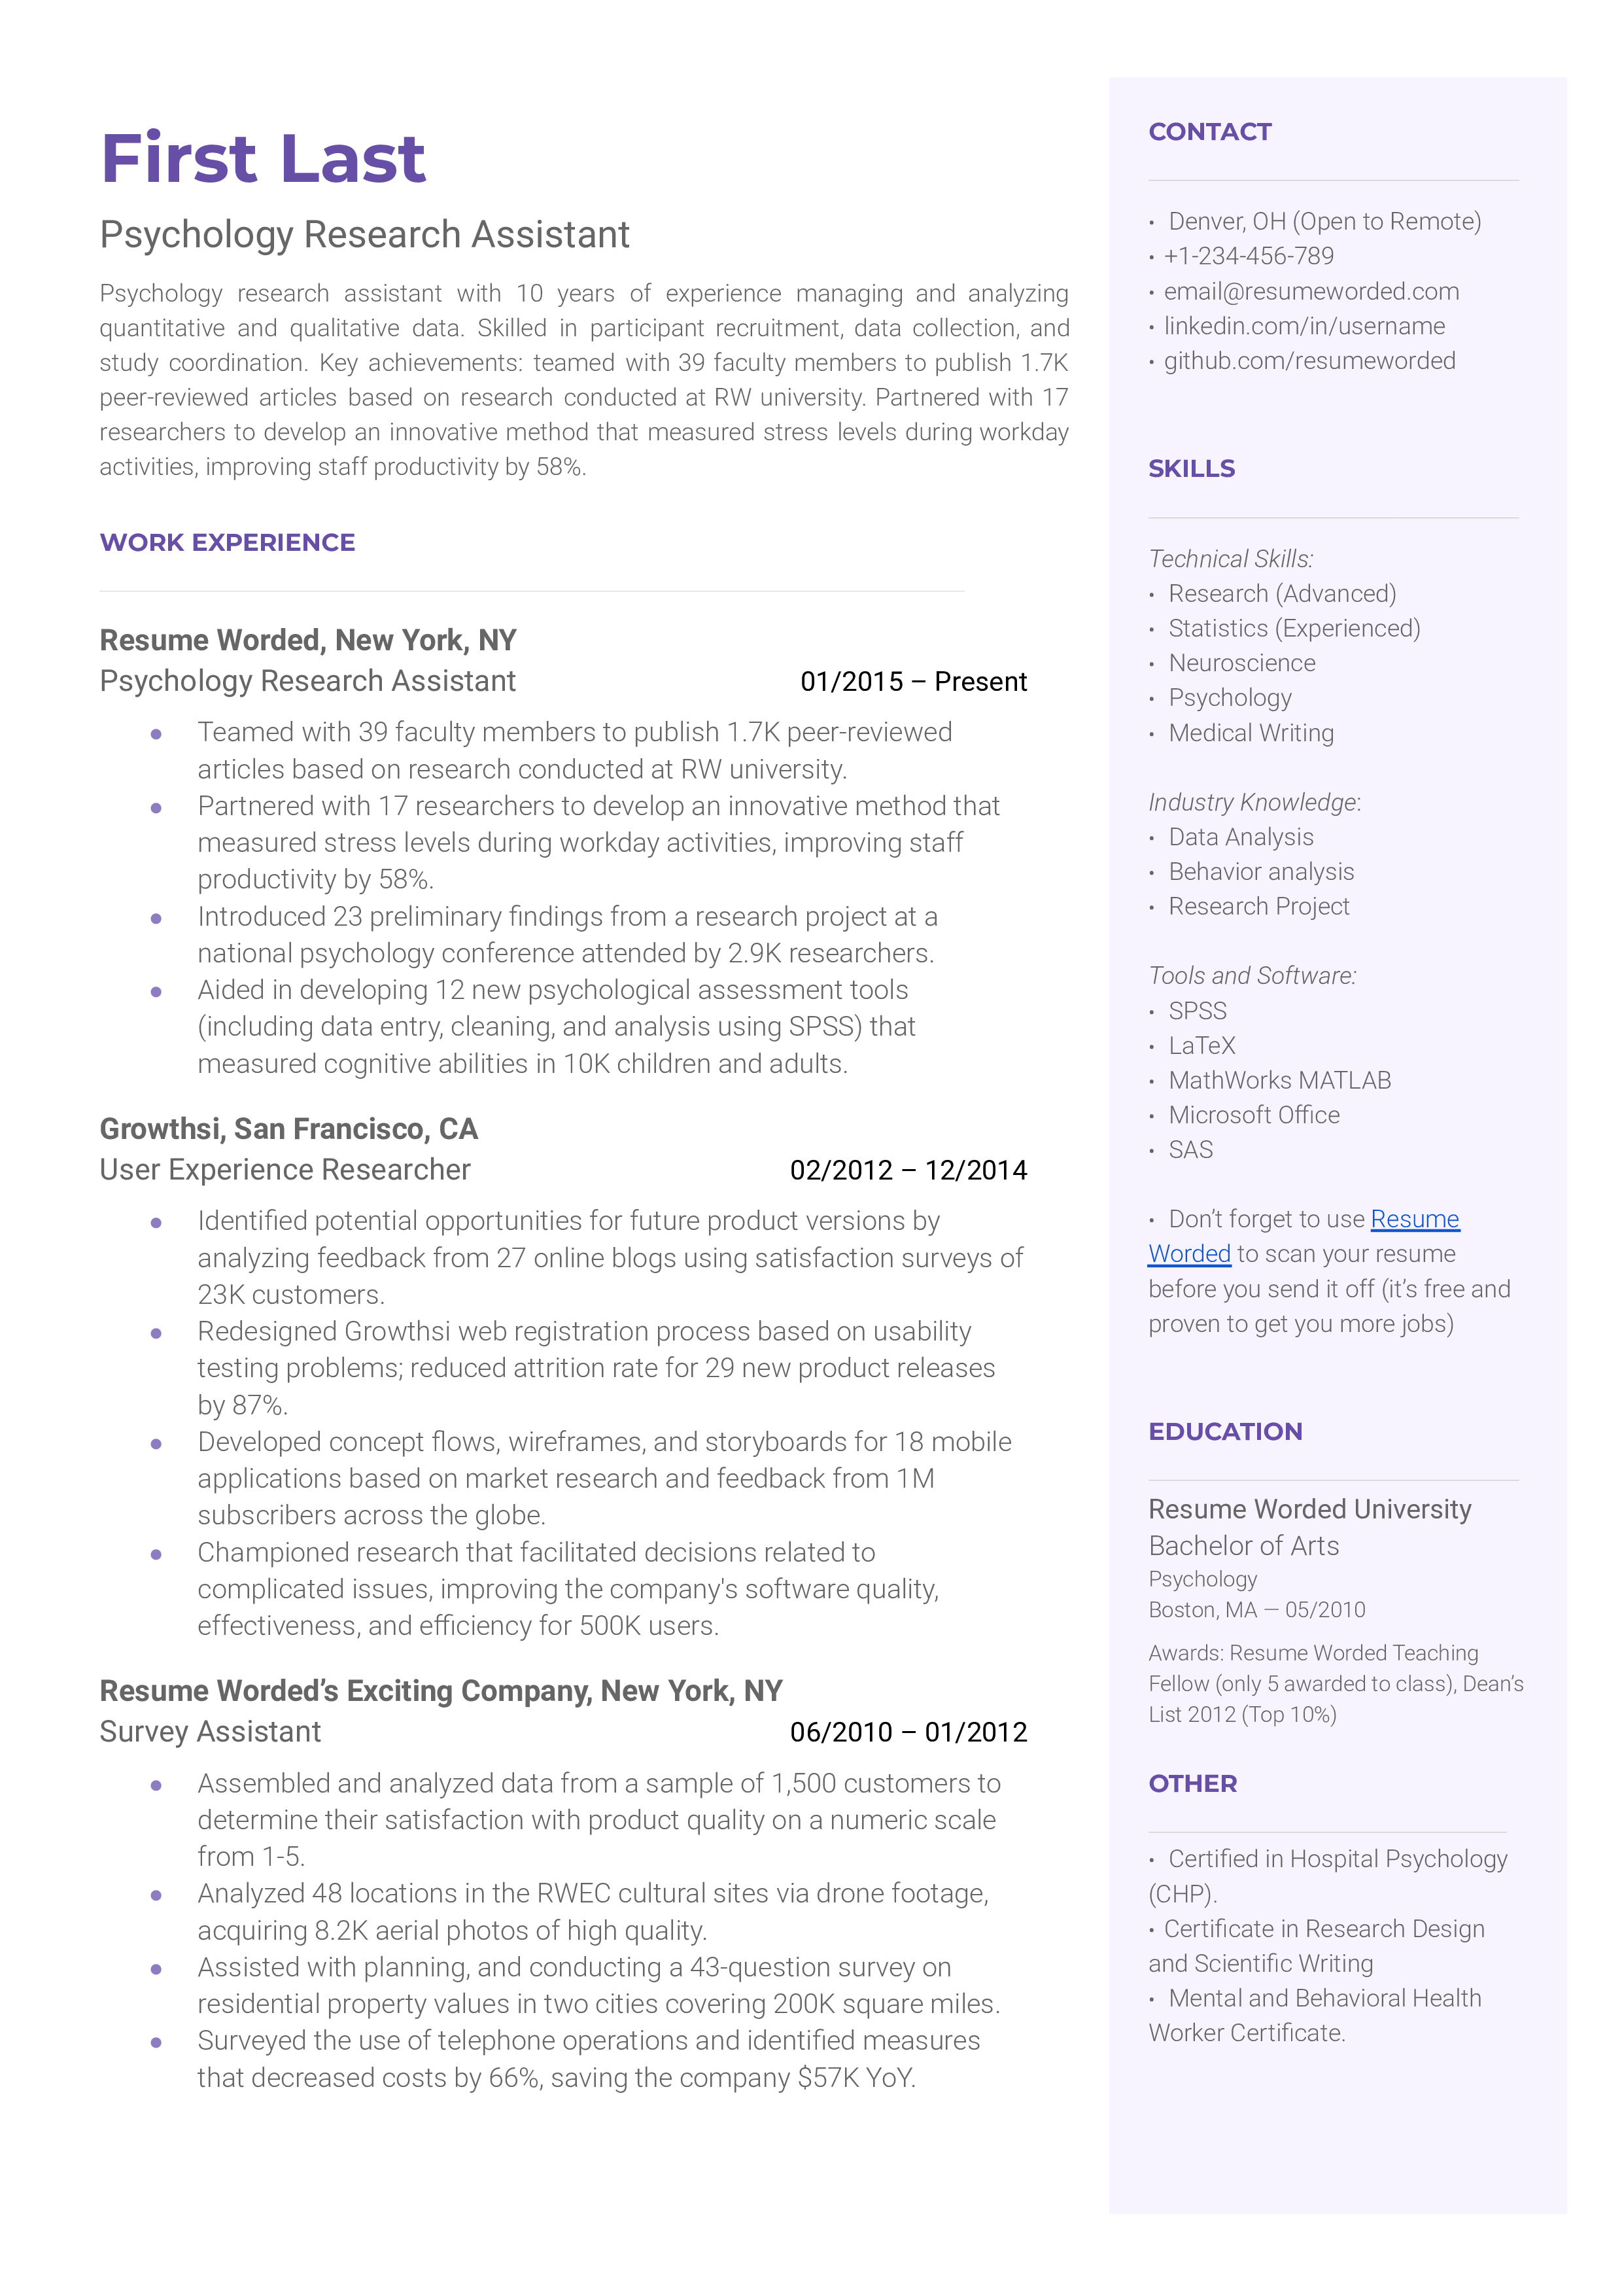 Sample CV for a Psychology Research Assistant position.